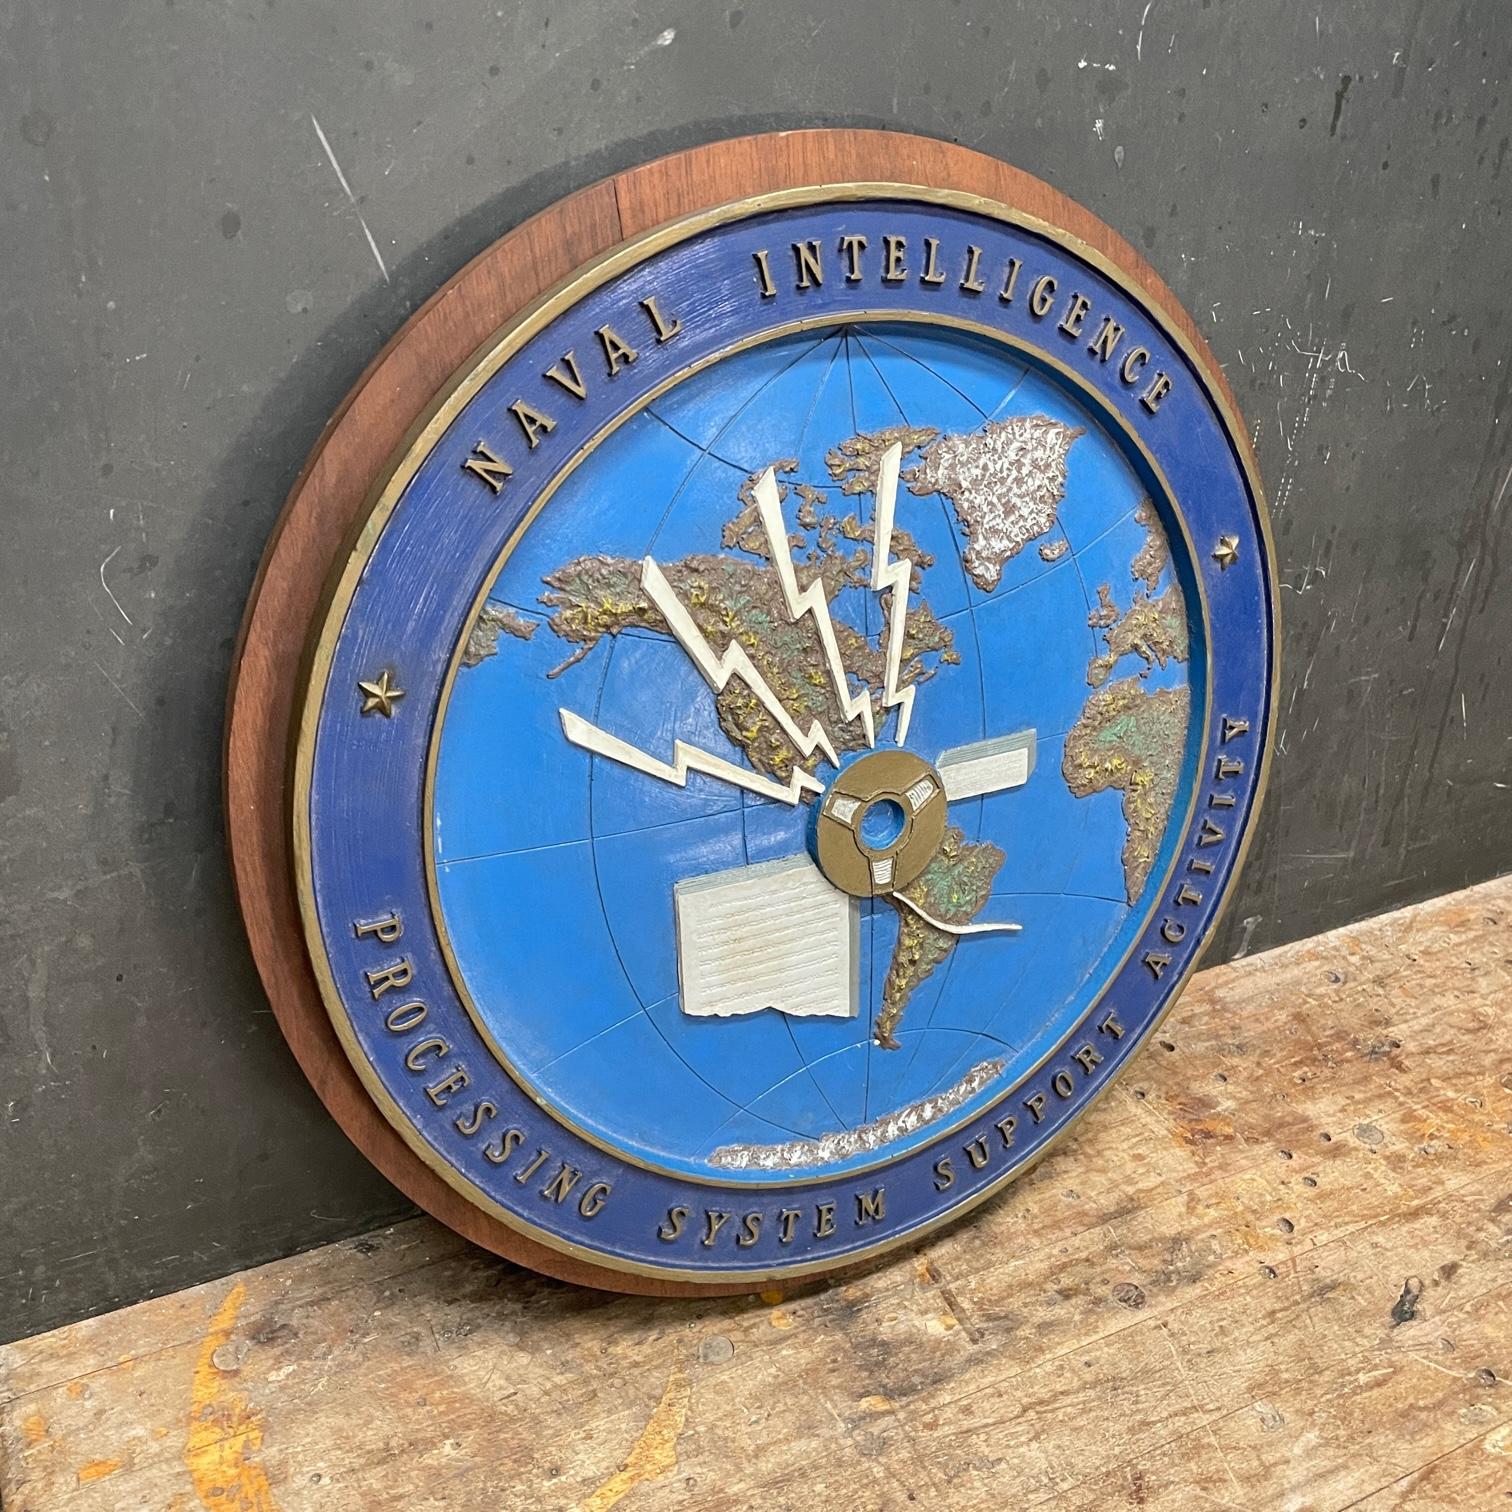 Rare and Obscure Naval Department Office Wall Plaque / Sign.

Plaque Only Dia 15 x Thk 5/8 in.